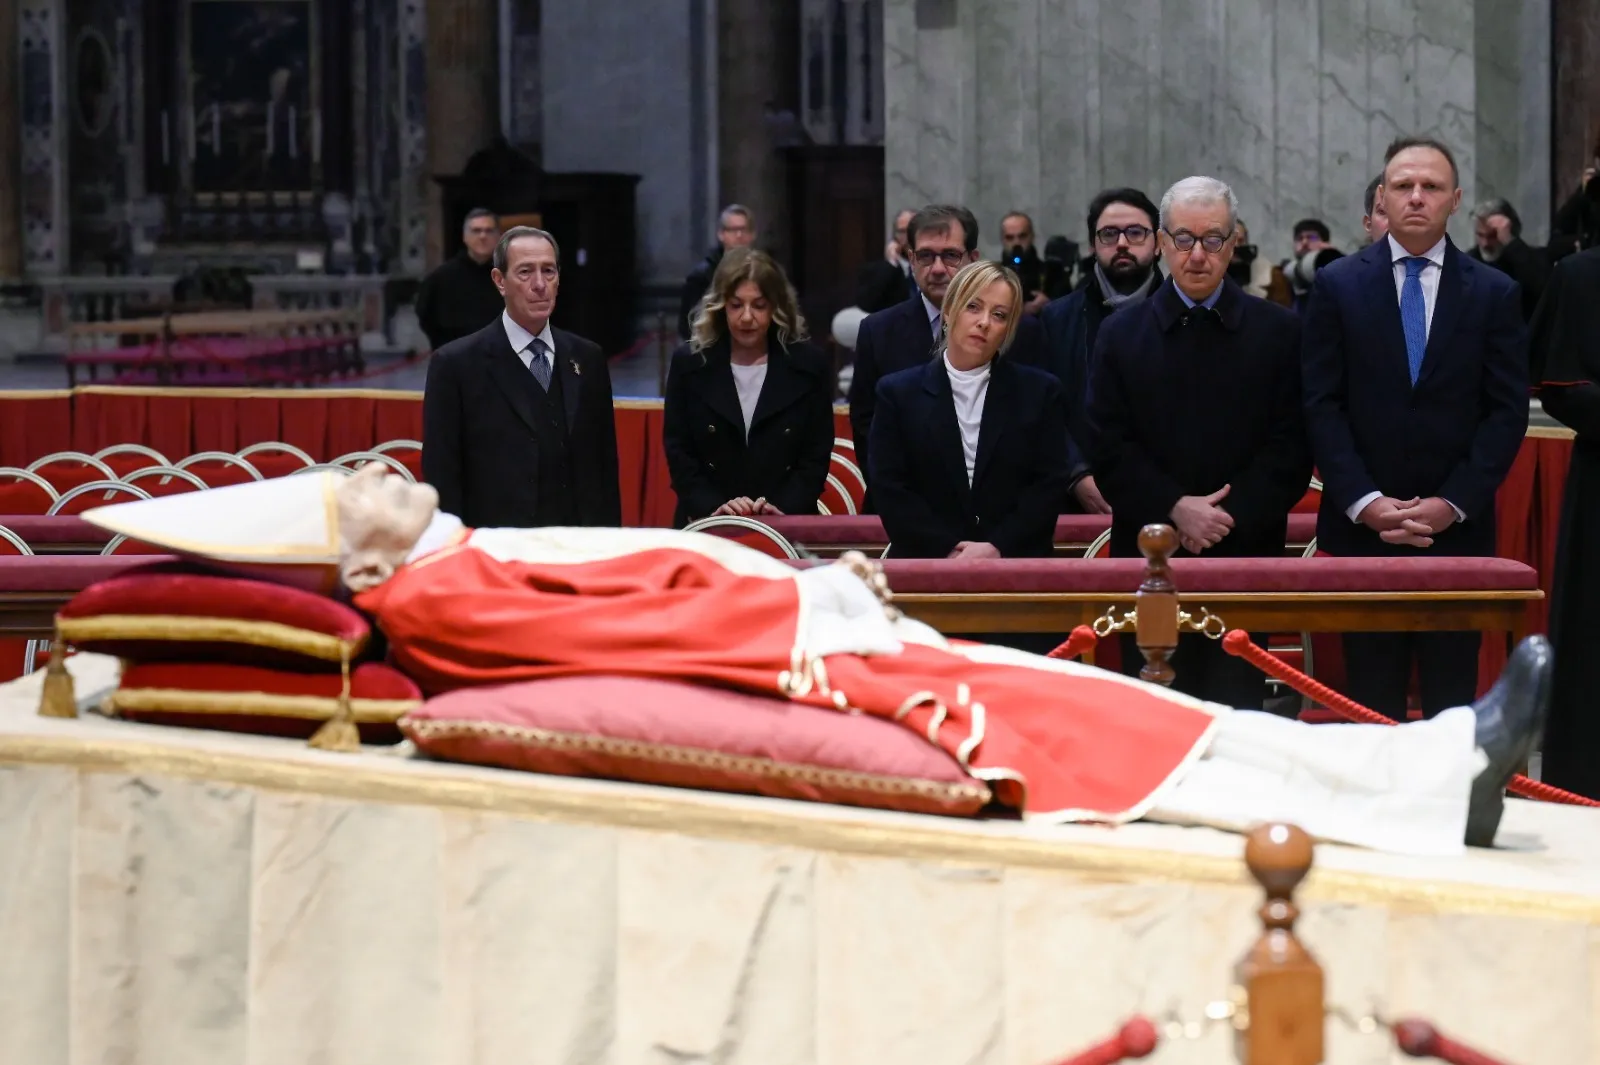 Italy's Prime Minister, Giorgia Meloni (third from left, front row) pays her respects to the late Pope Emeritus Benedict XVI at St. Peter's Basilica on Jan. 2, 2023. Vatican Media